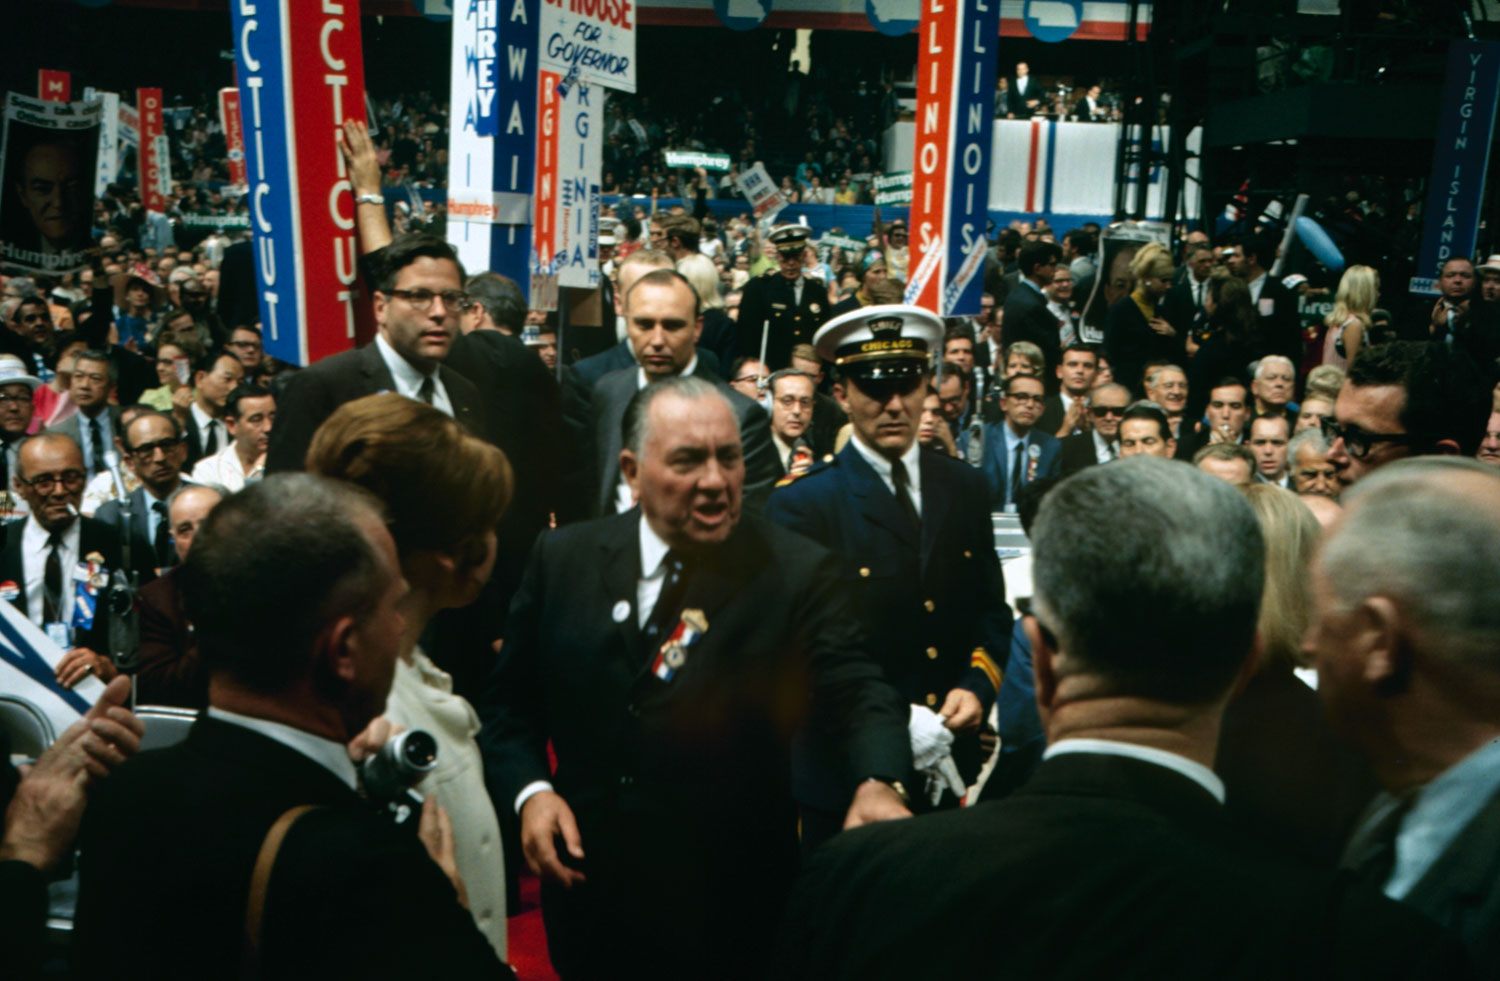 Chicago mayor Richard Daley — a Democrat who served for five terms and remains one of the most controversial figures in Chicago political history — on the floor during the Democratic National Convention in 1968.